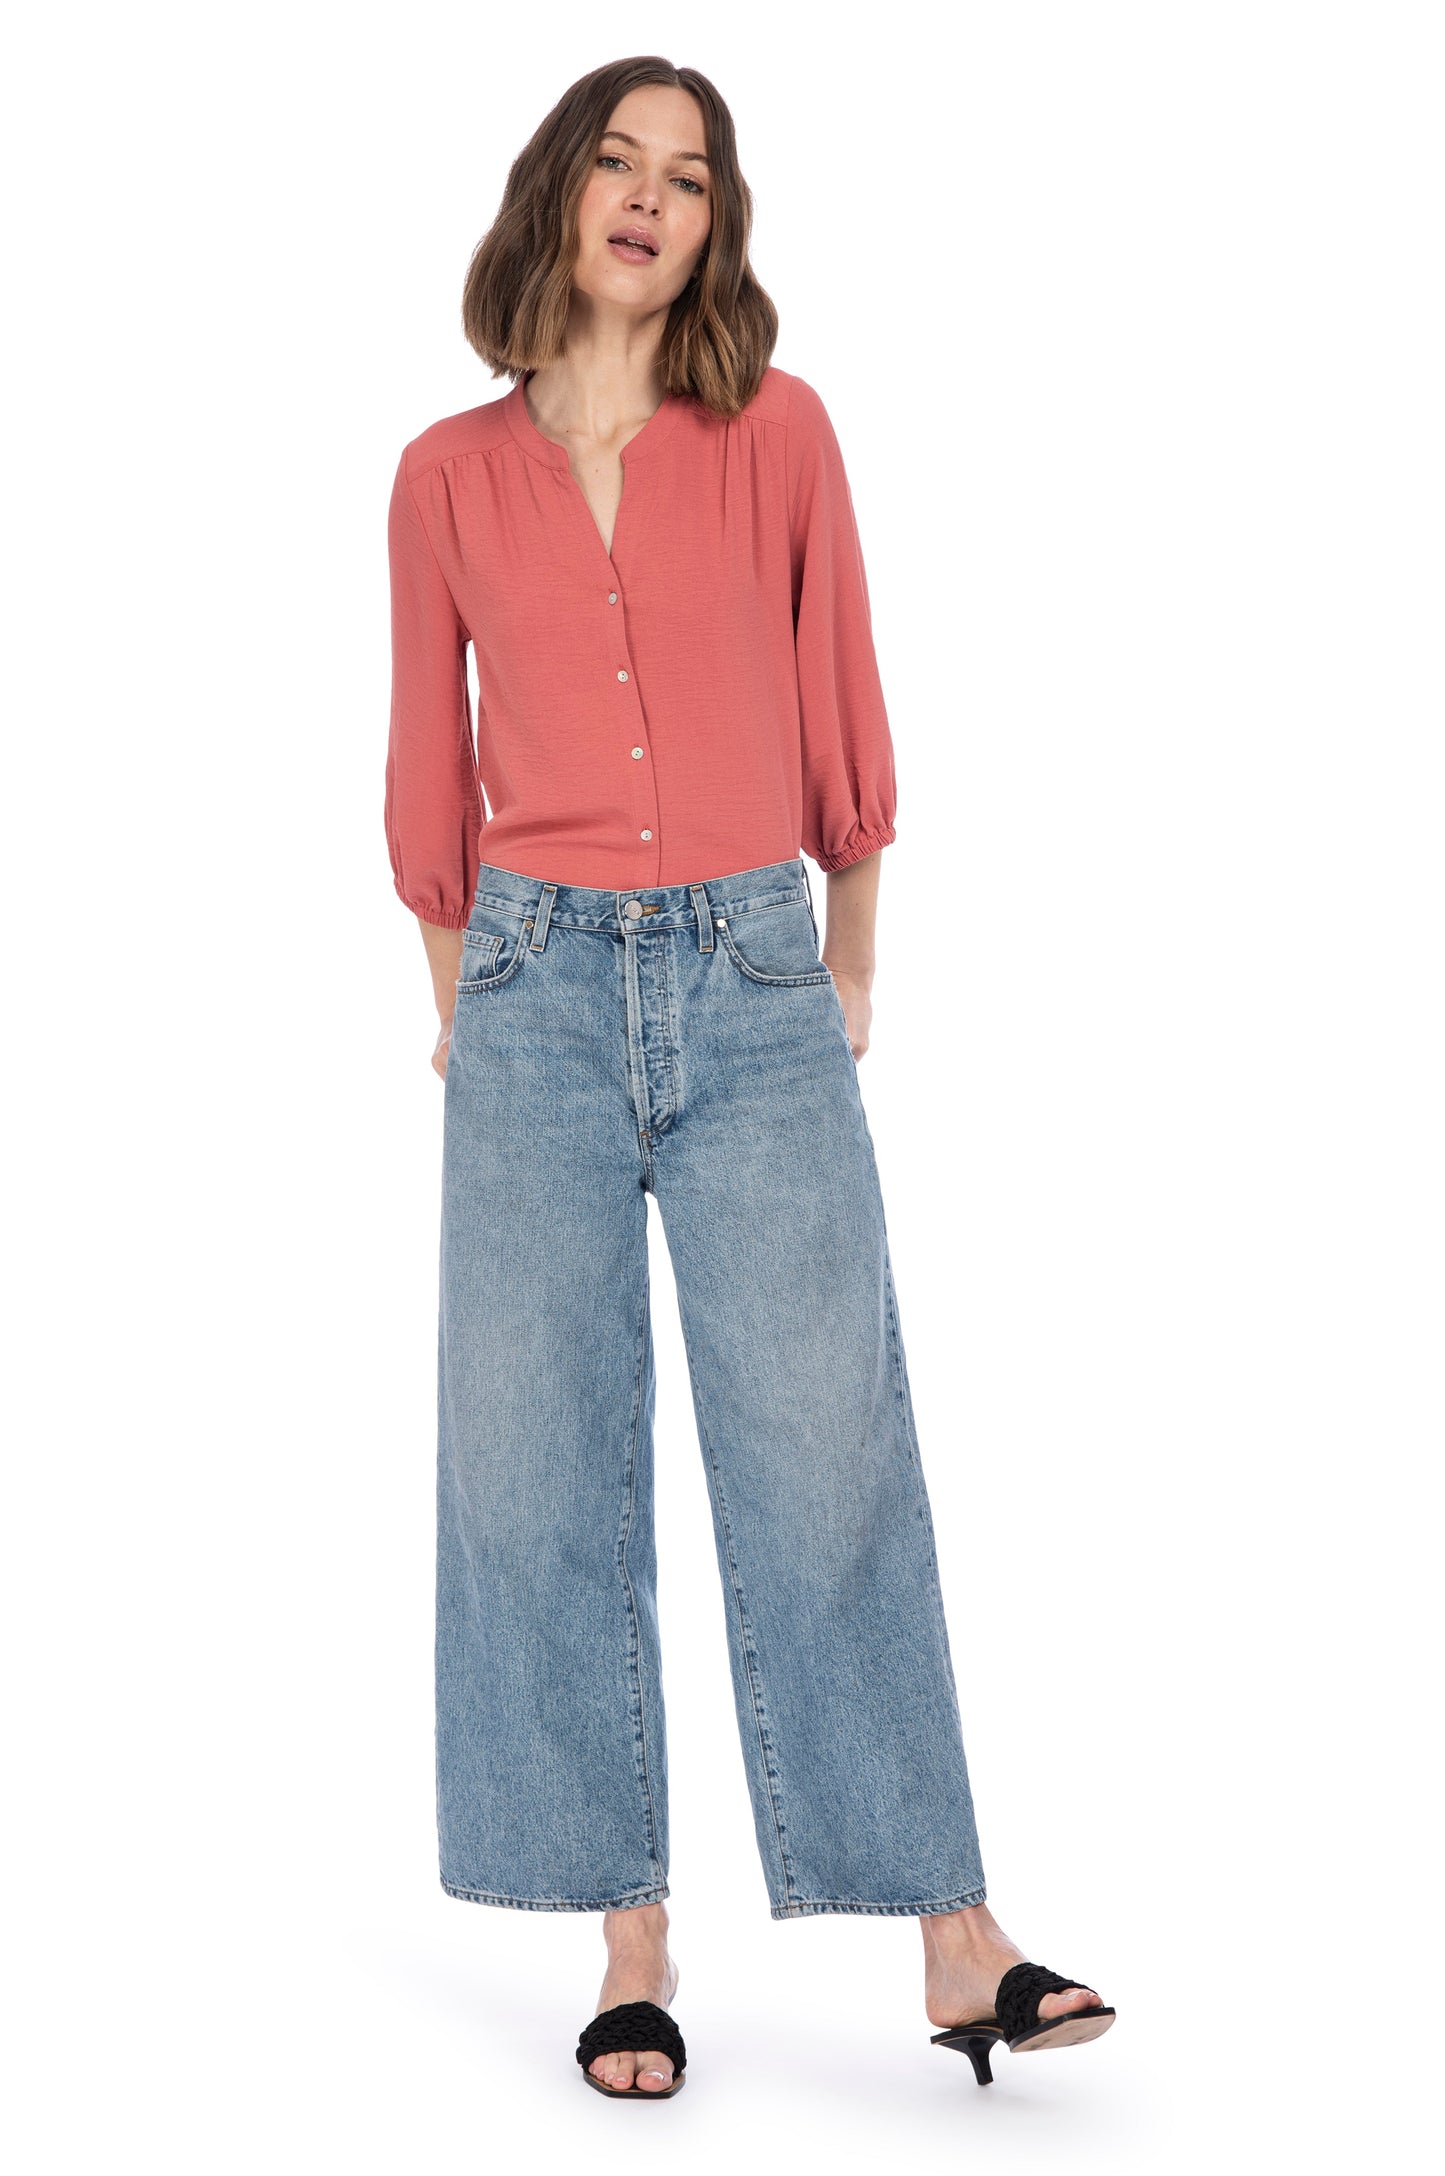 A woman standing confidently in a casual chic outfit, featuring a rust-colored, 100% Polyester RIVER BUTTON UP BLOUSE by B Collection by Bobeau paired with classic wide-leg denim jeans and black open-toe heels.